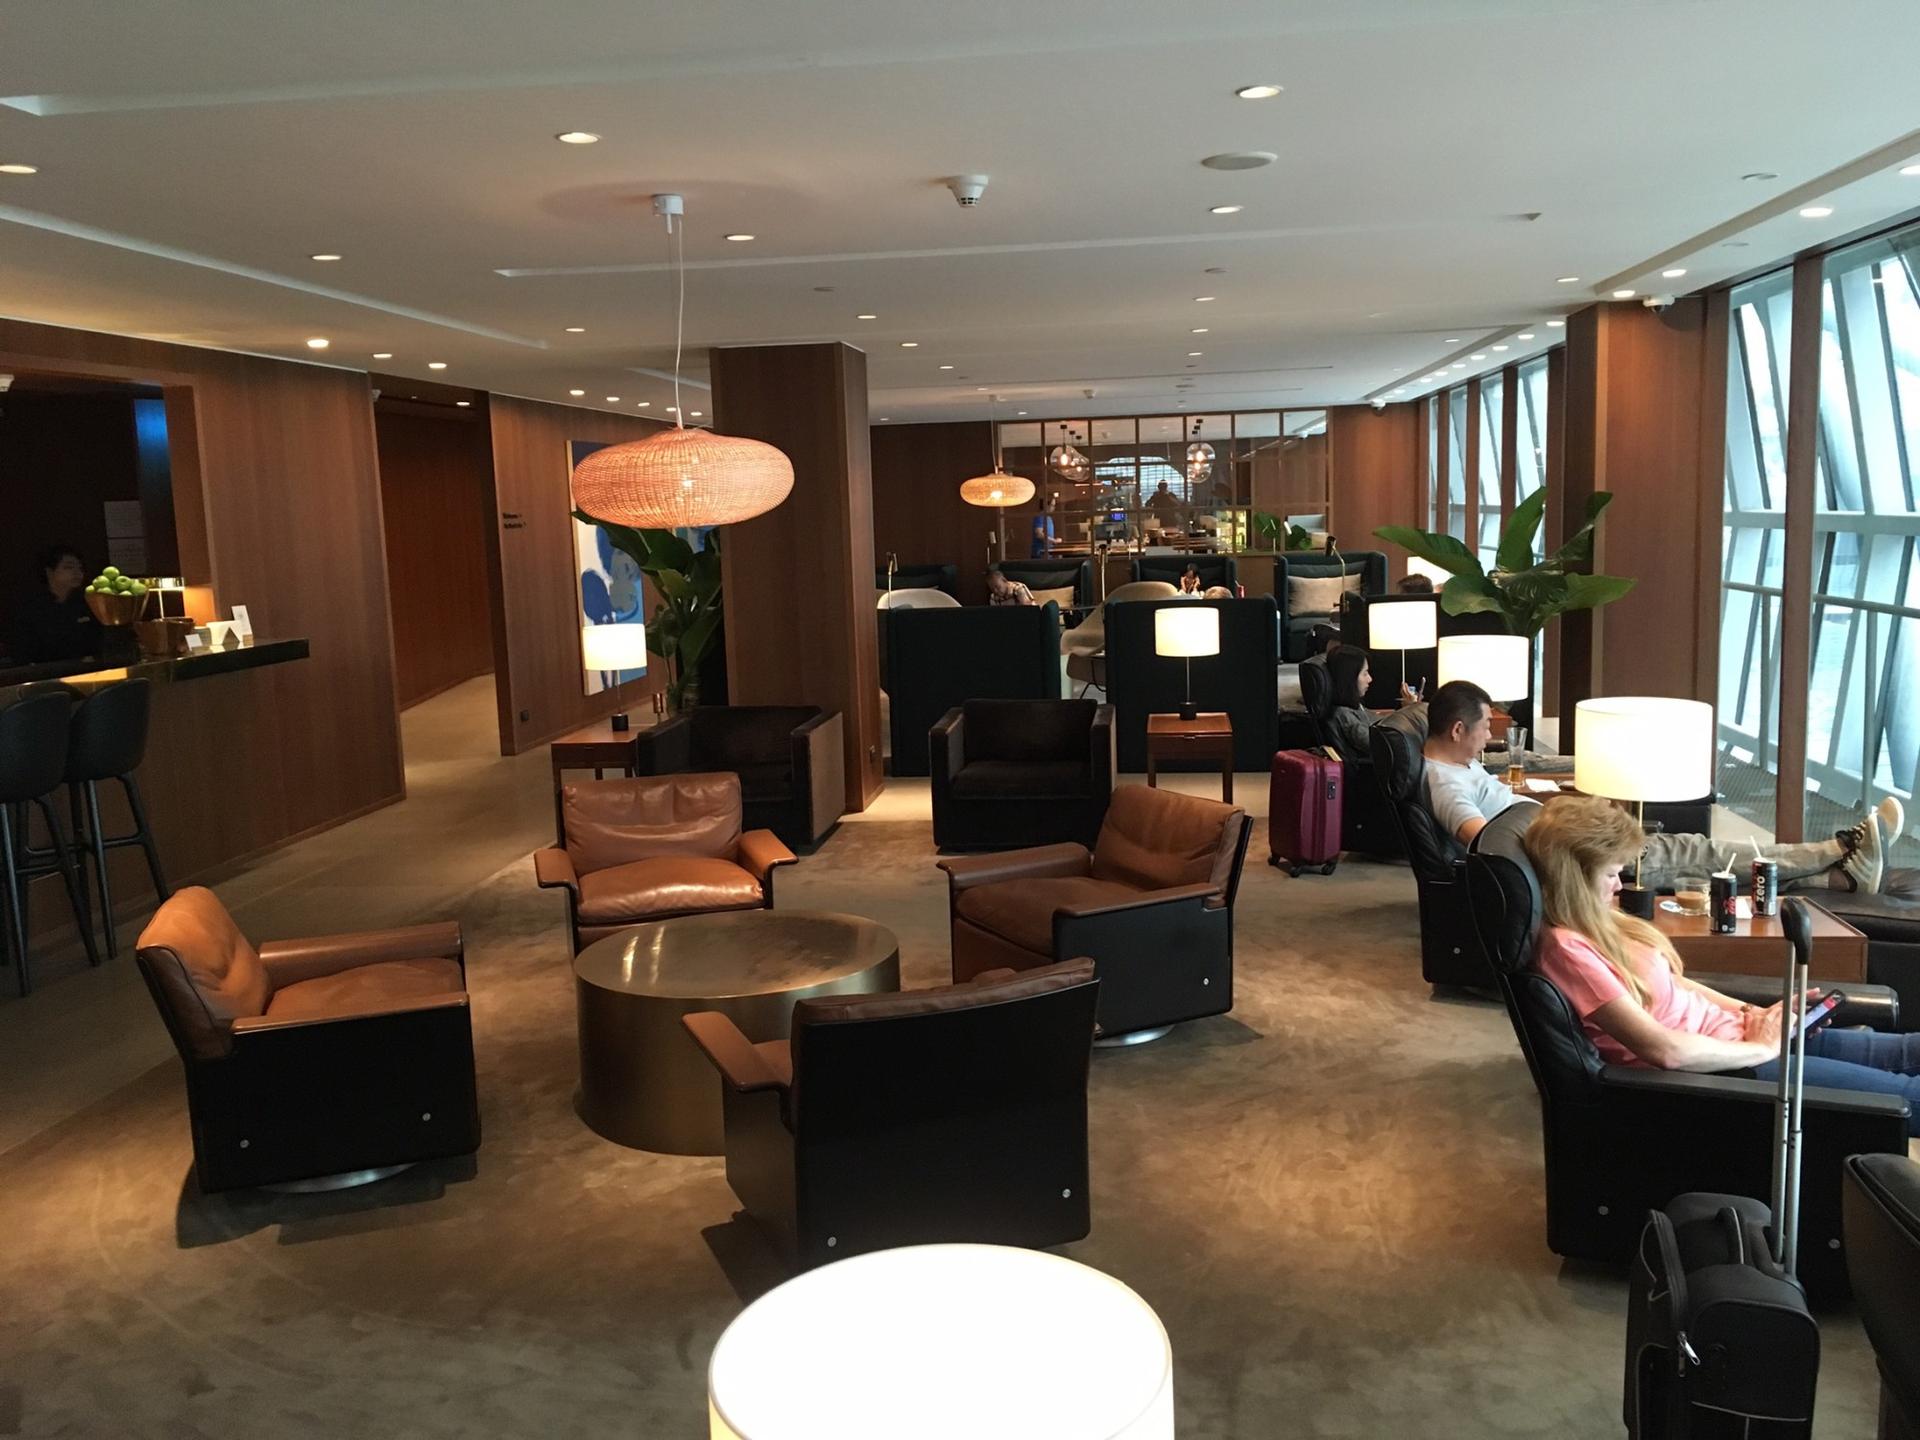 Cathay Pacific First and Business Class Lounge image 53 of 69